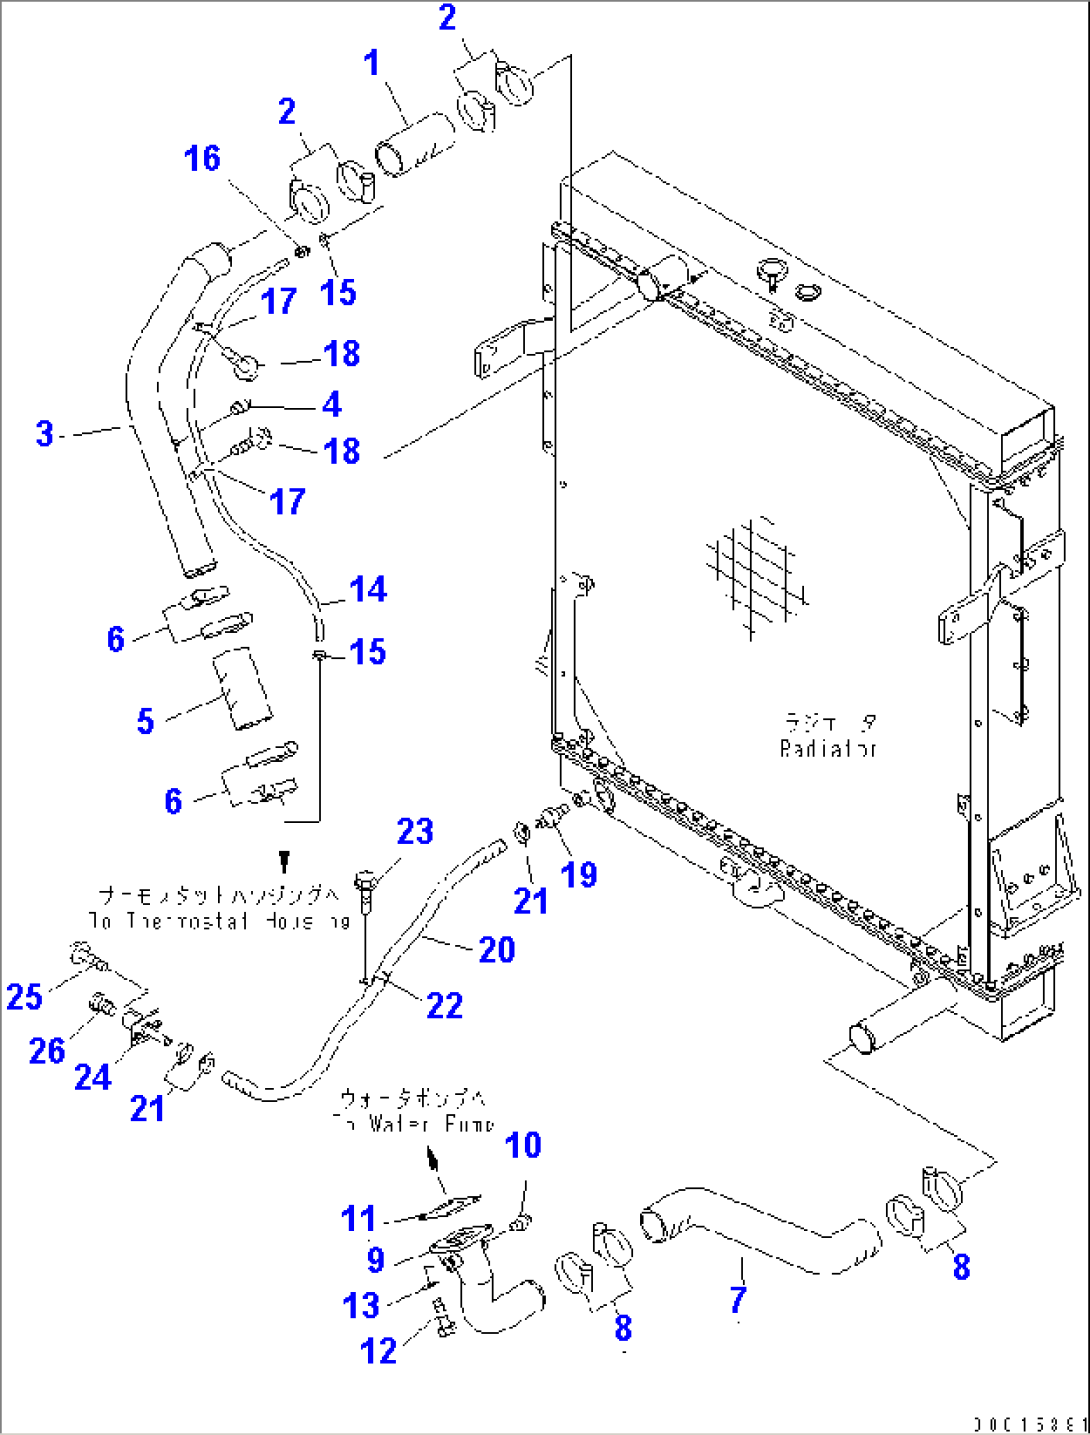 RADIATOR (DRAIN AND ENGINE PIPING) (WITH AIR CONDITIONER OR HEATER)(#53001-)